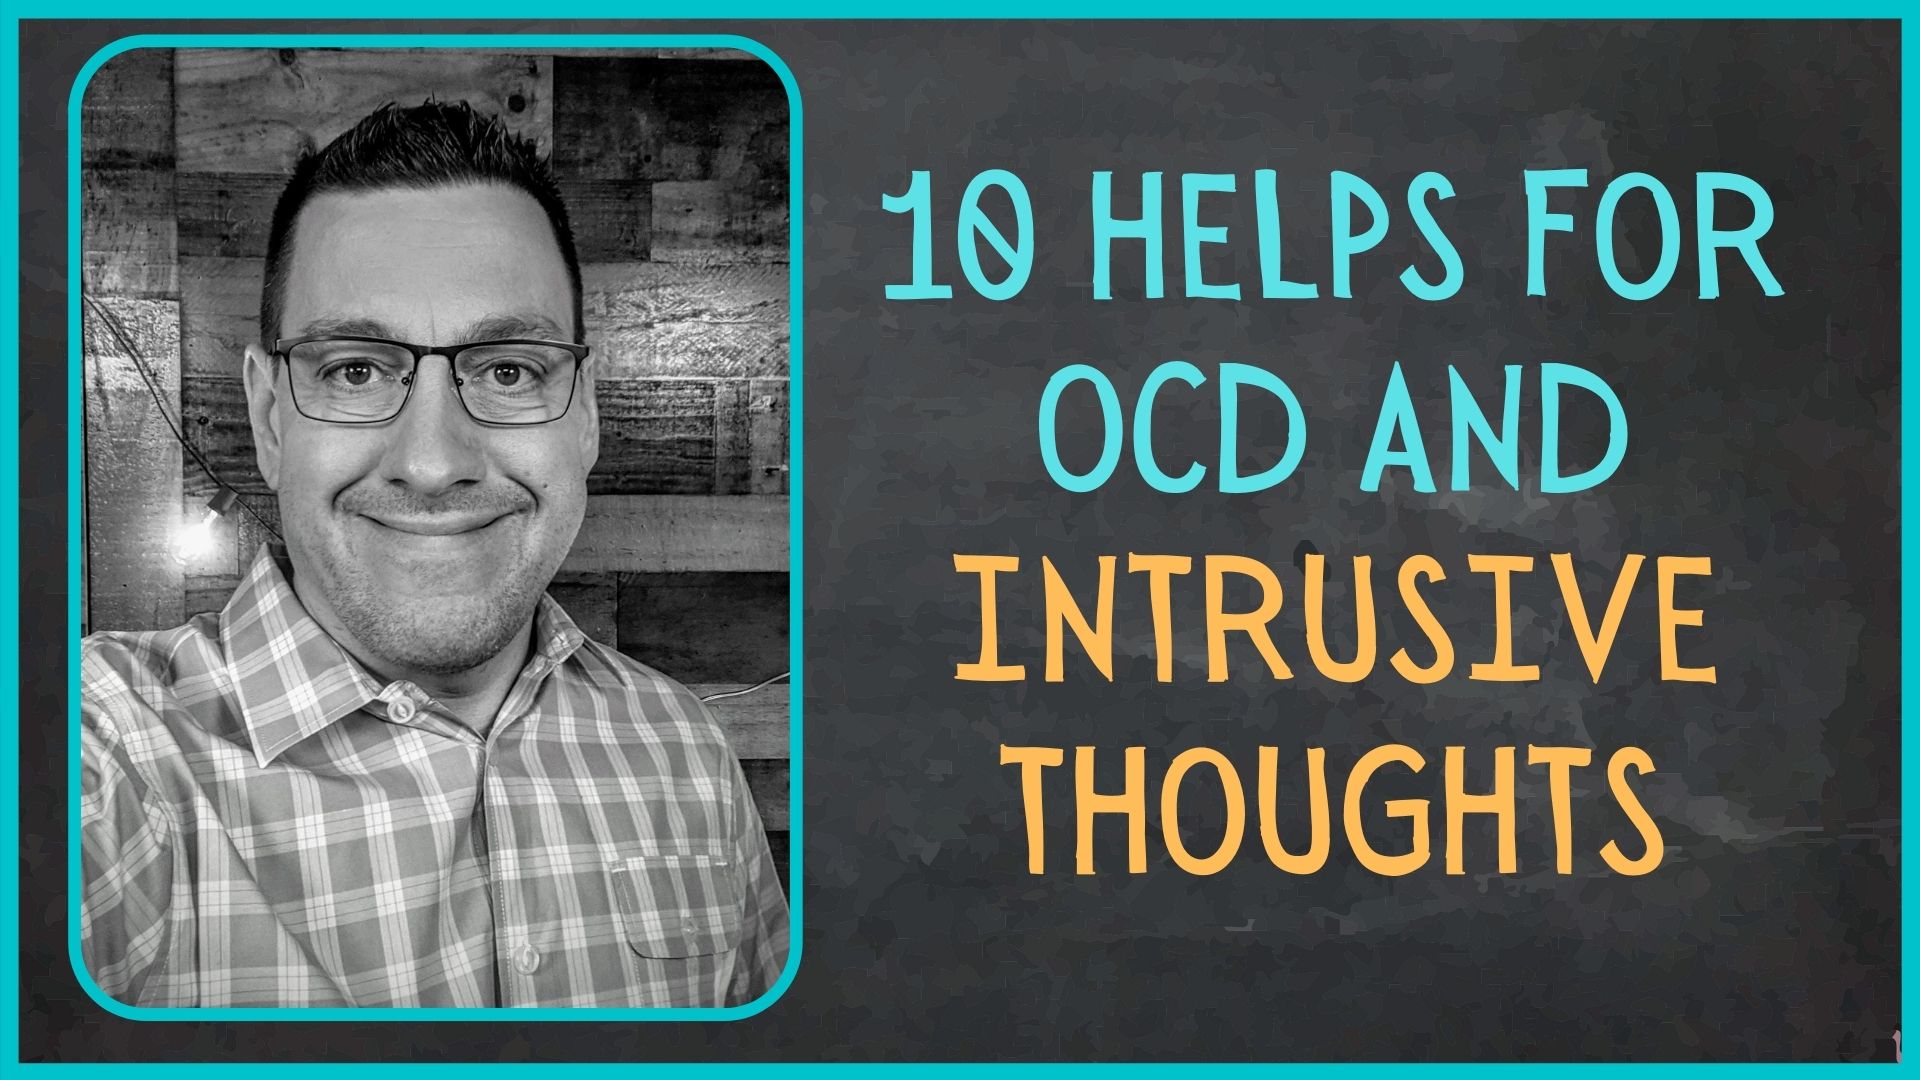 dealing with intrusive thoughts ocd